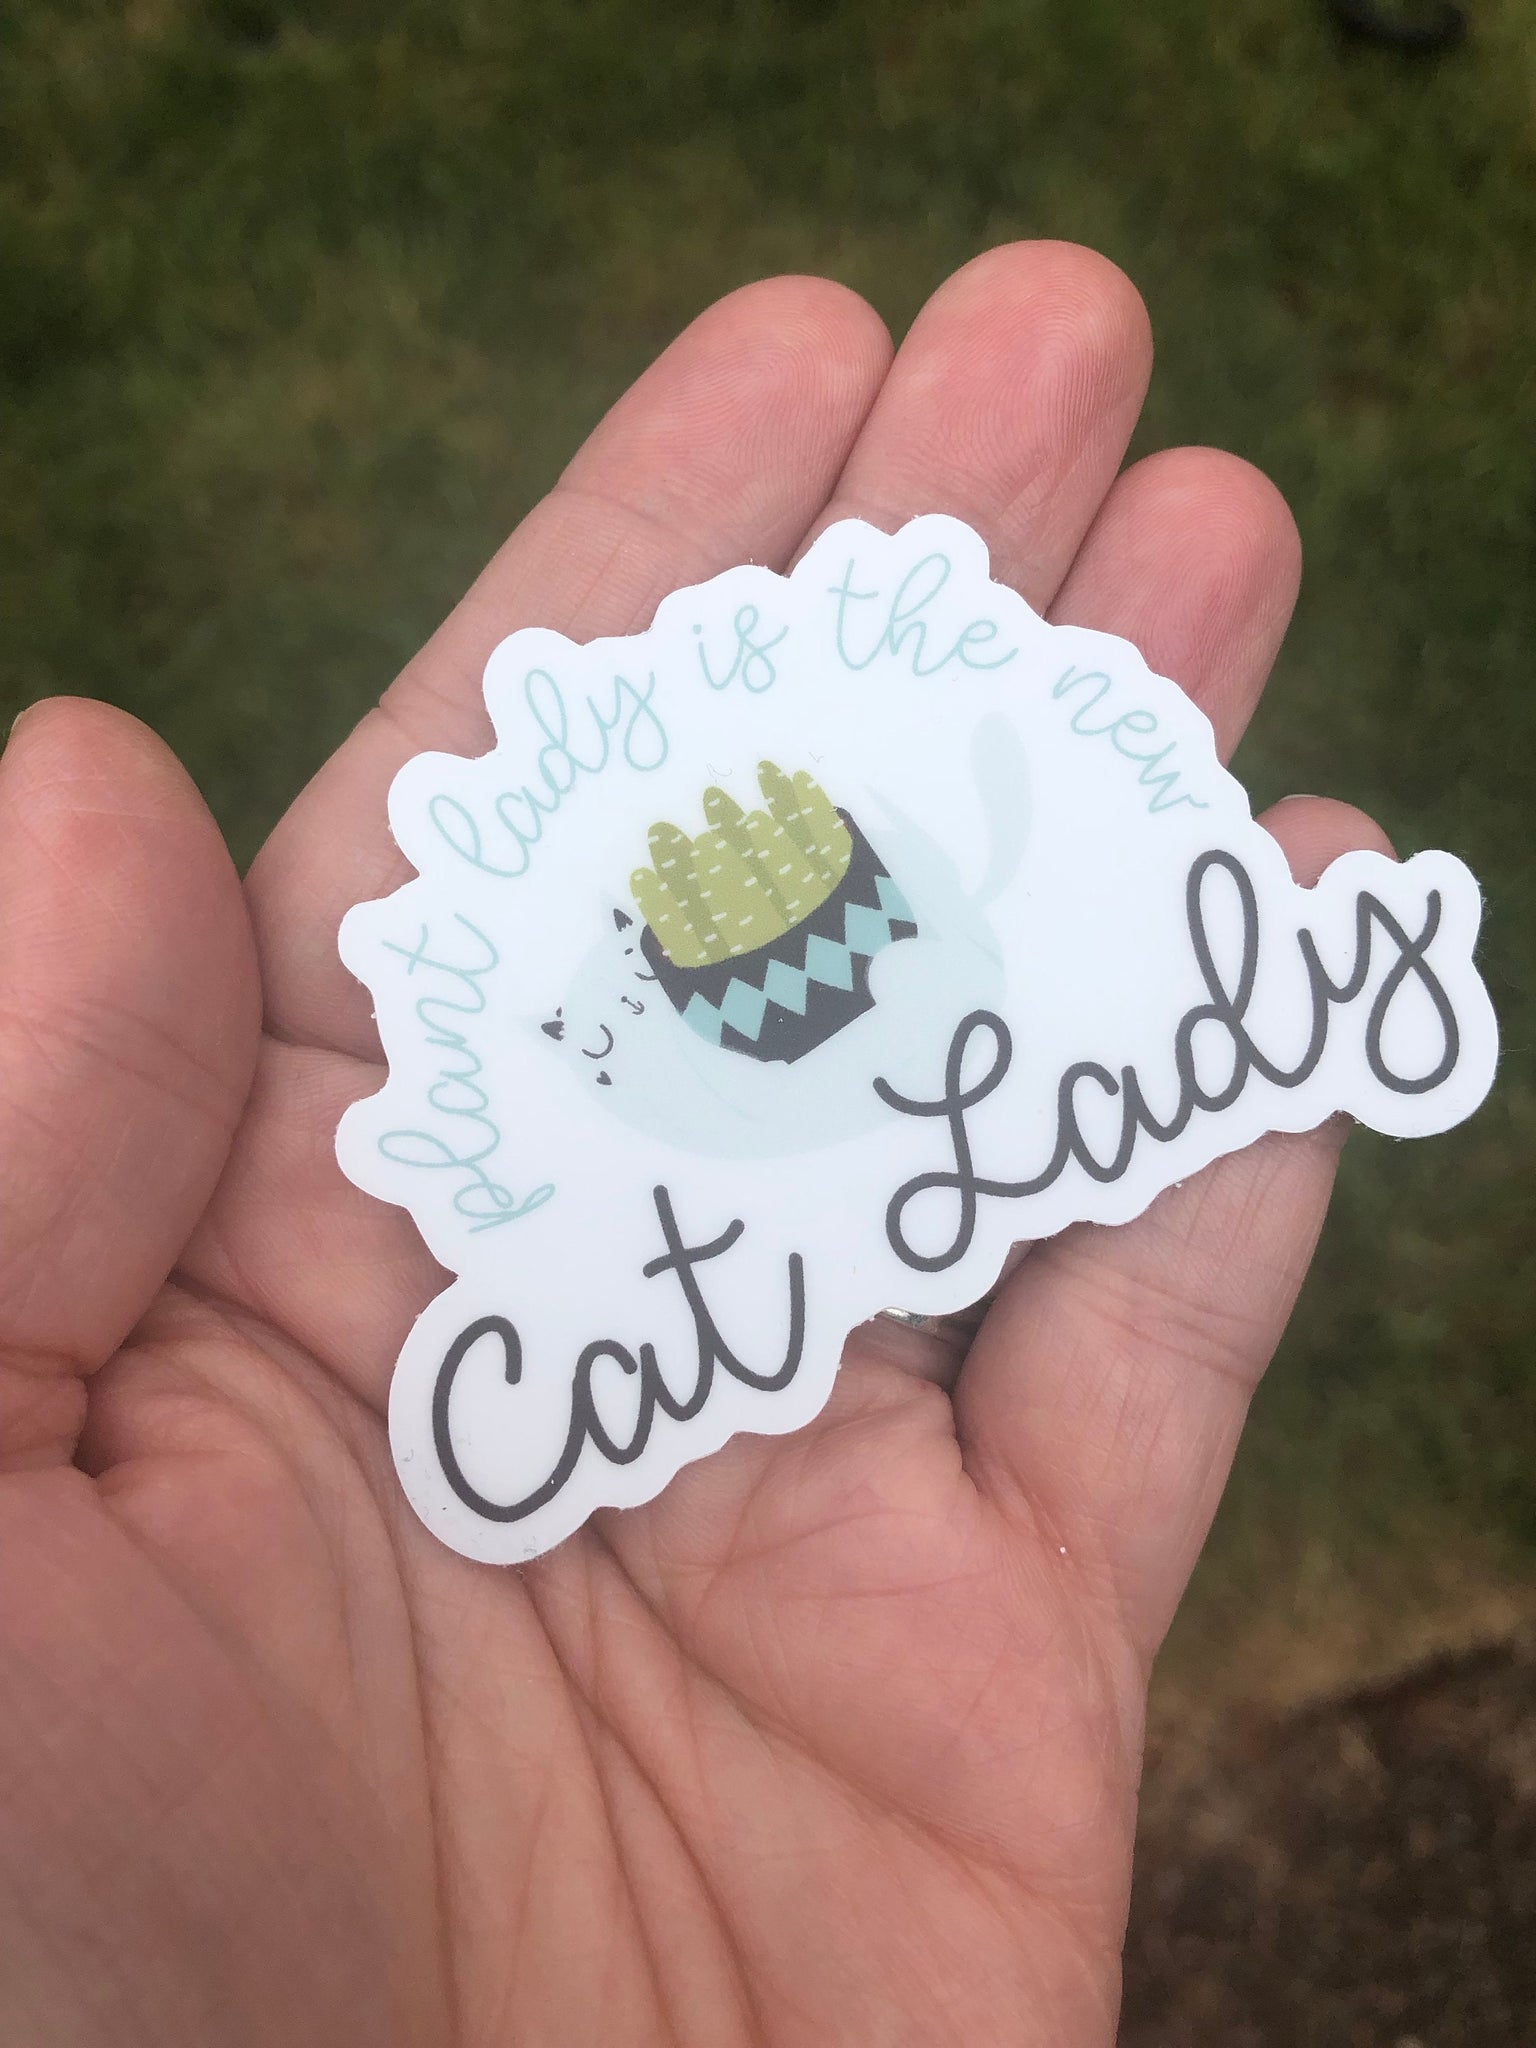 Plant lady is the new cat lady sticker